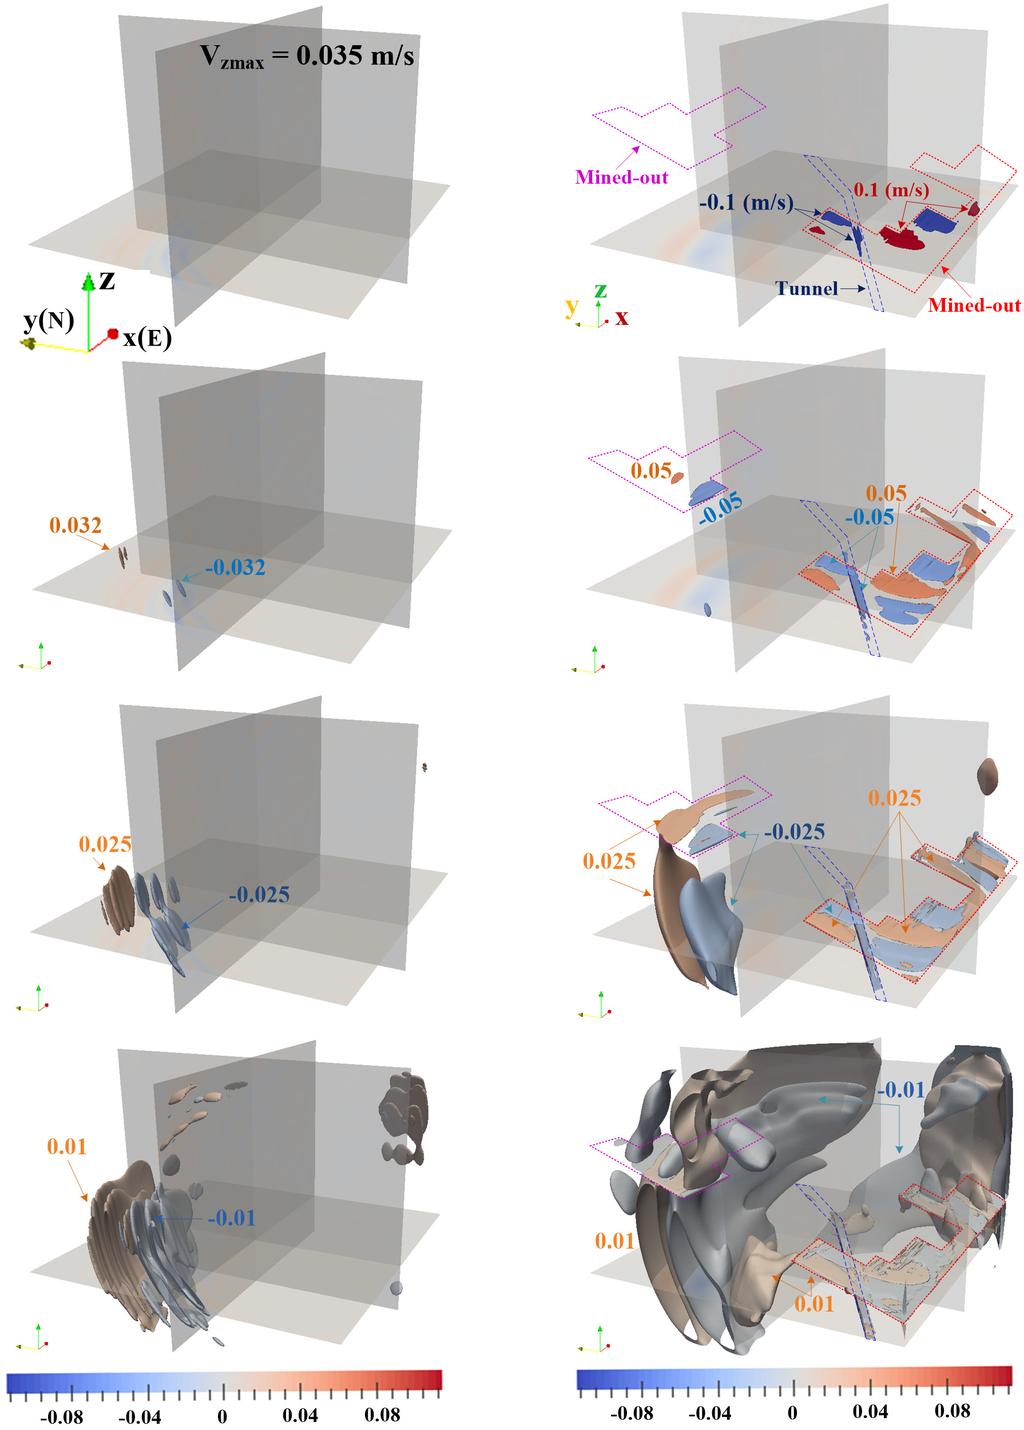 Numerical analysis of ground motion in a South African mine using SPECFEM3D X Wang and M Cai Figure 8 (a) Anatomy of V z (m/s) contours for the kinematic rupture source model at t = 0.